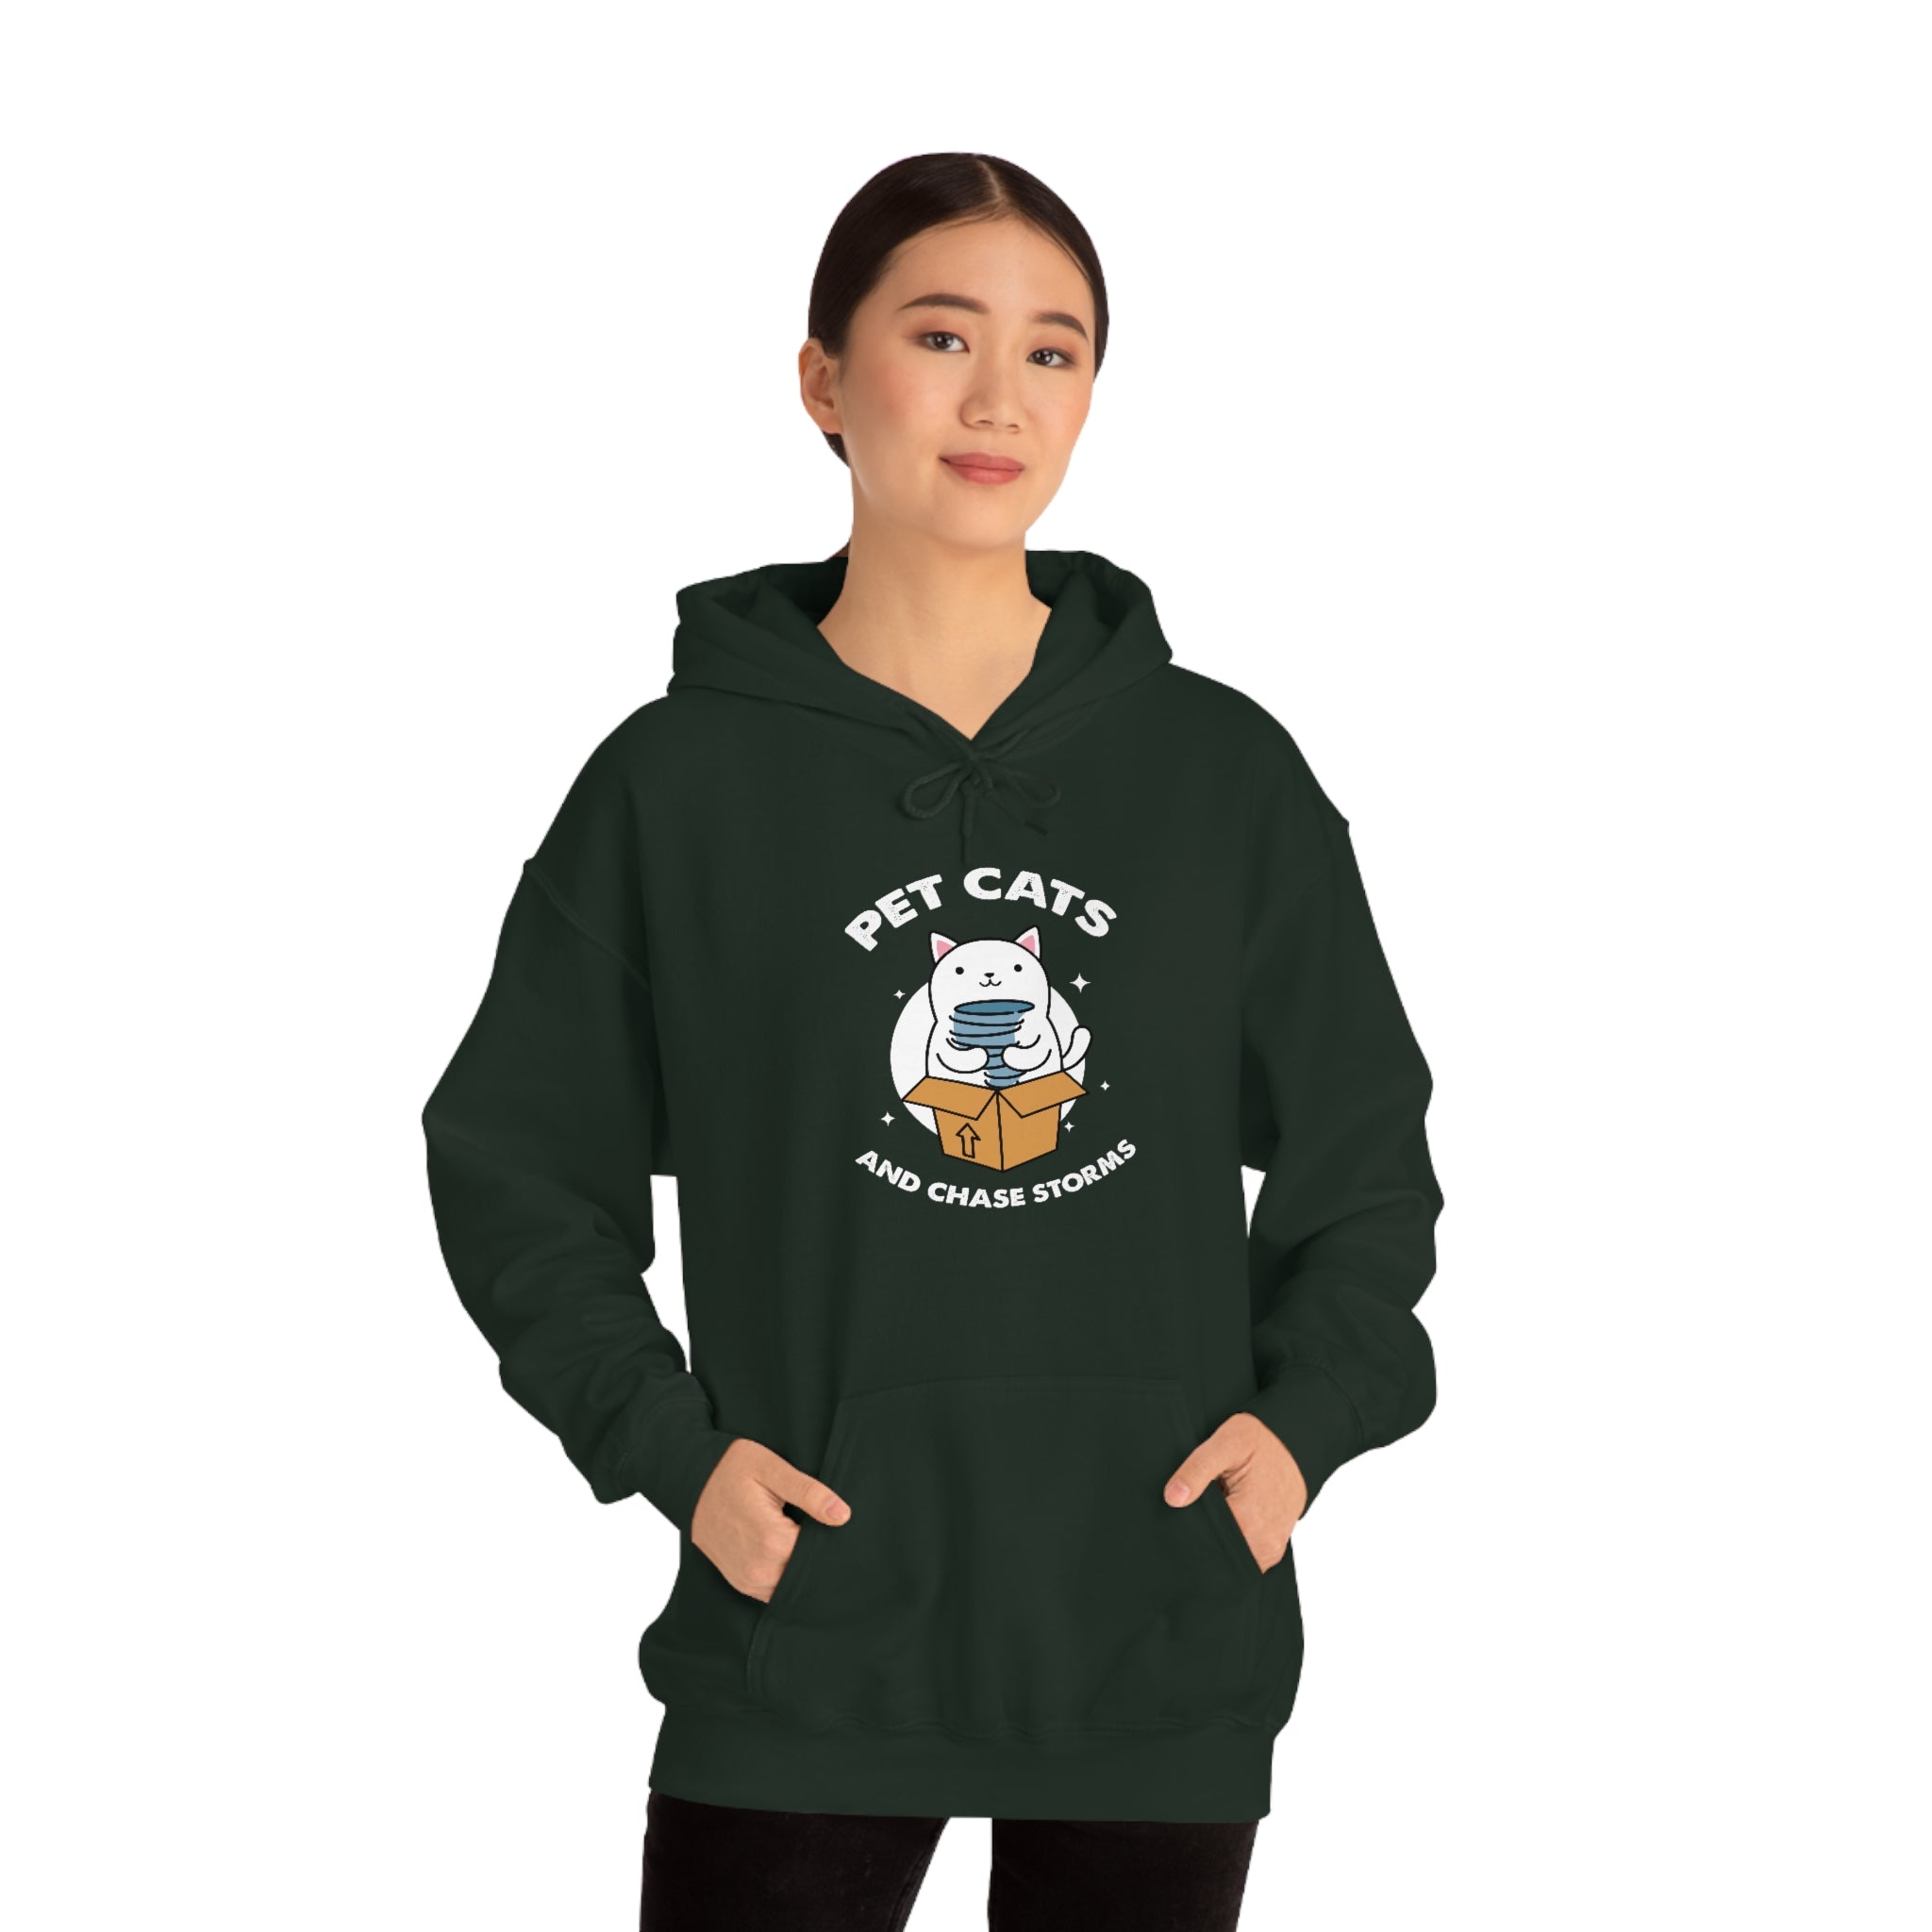 Pet Cats and Chase Storms Hoodie 